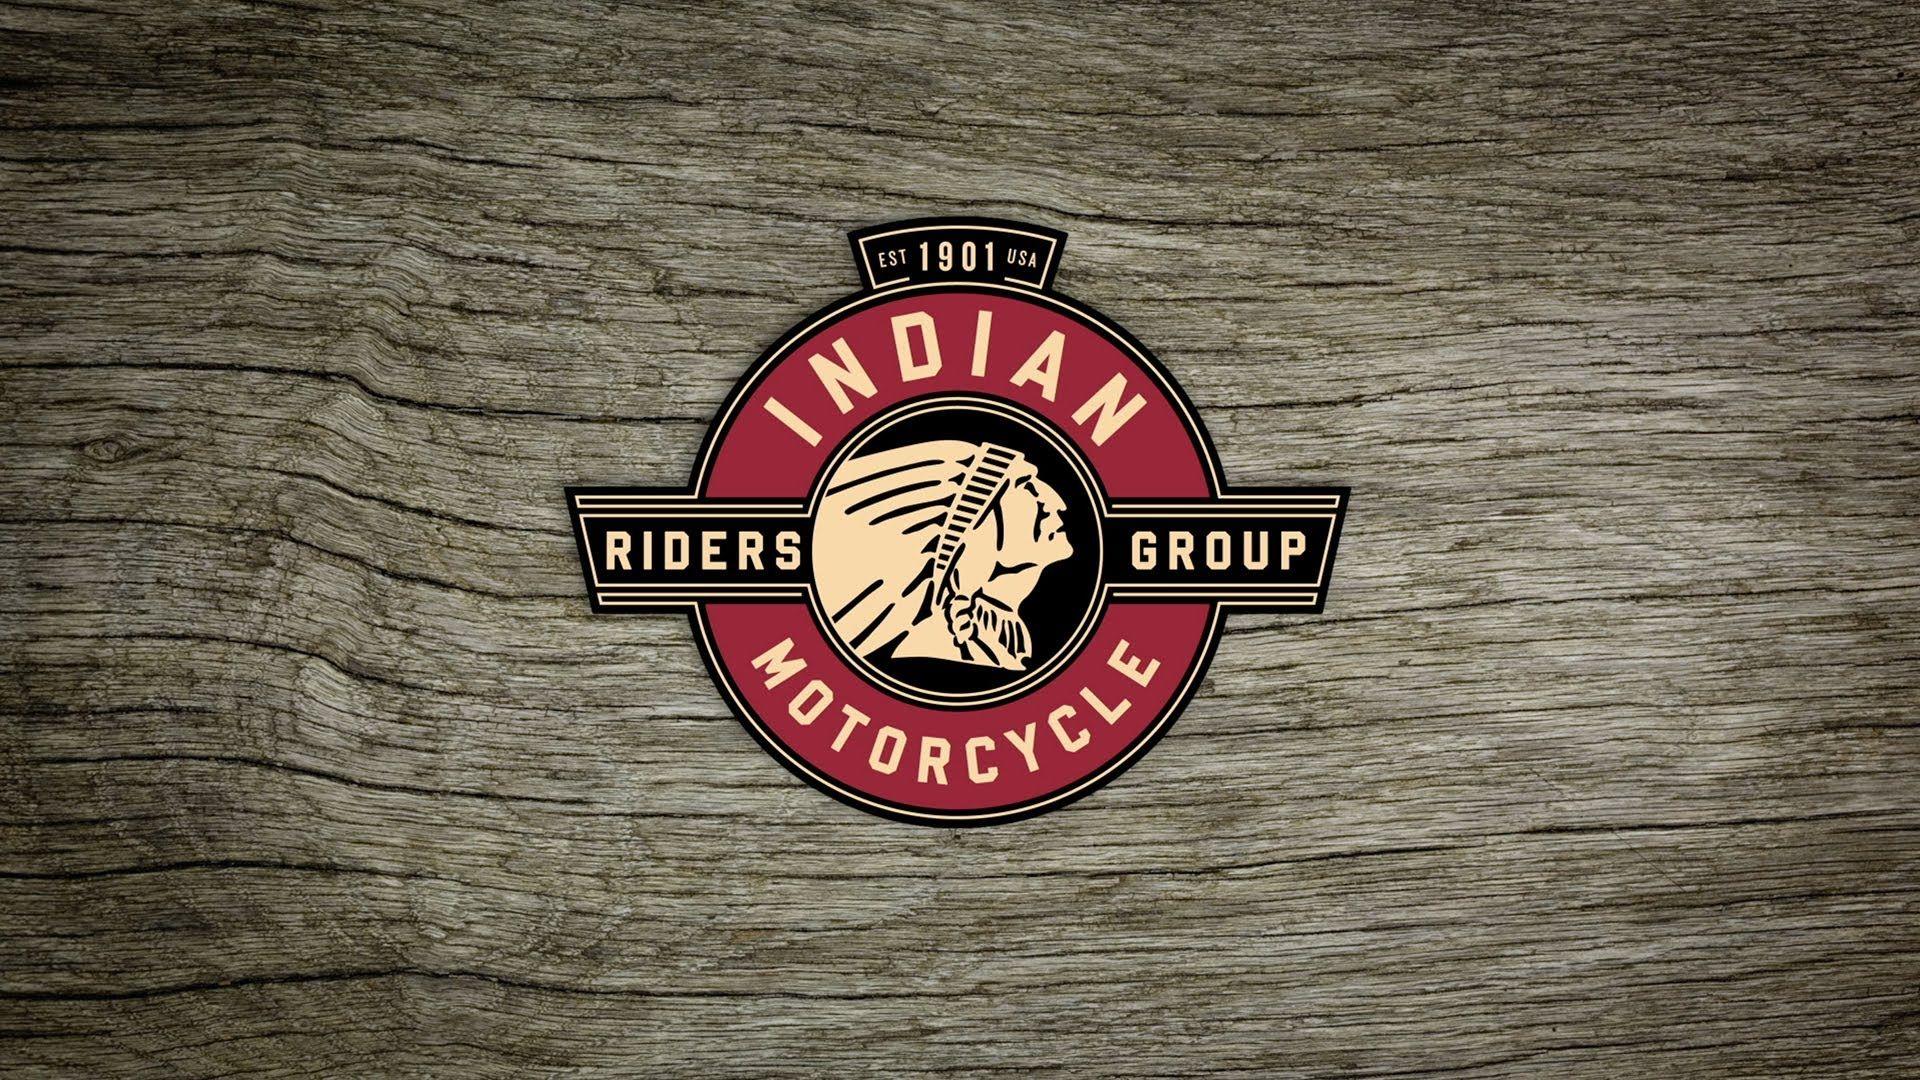 The Indian Motorcycle Riders Group